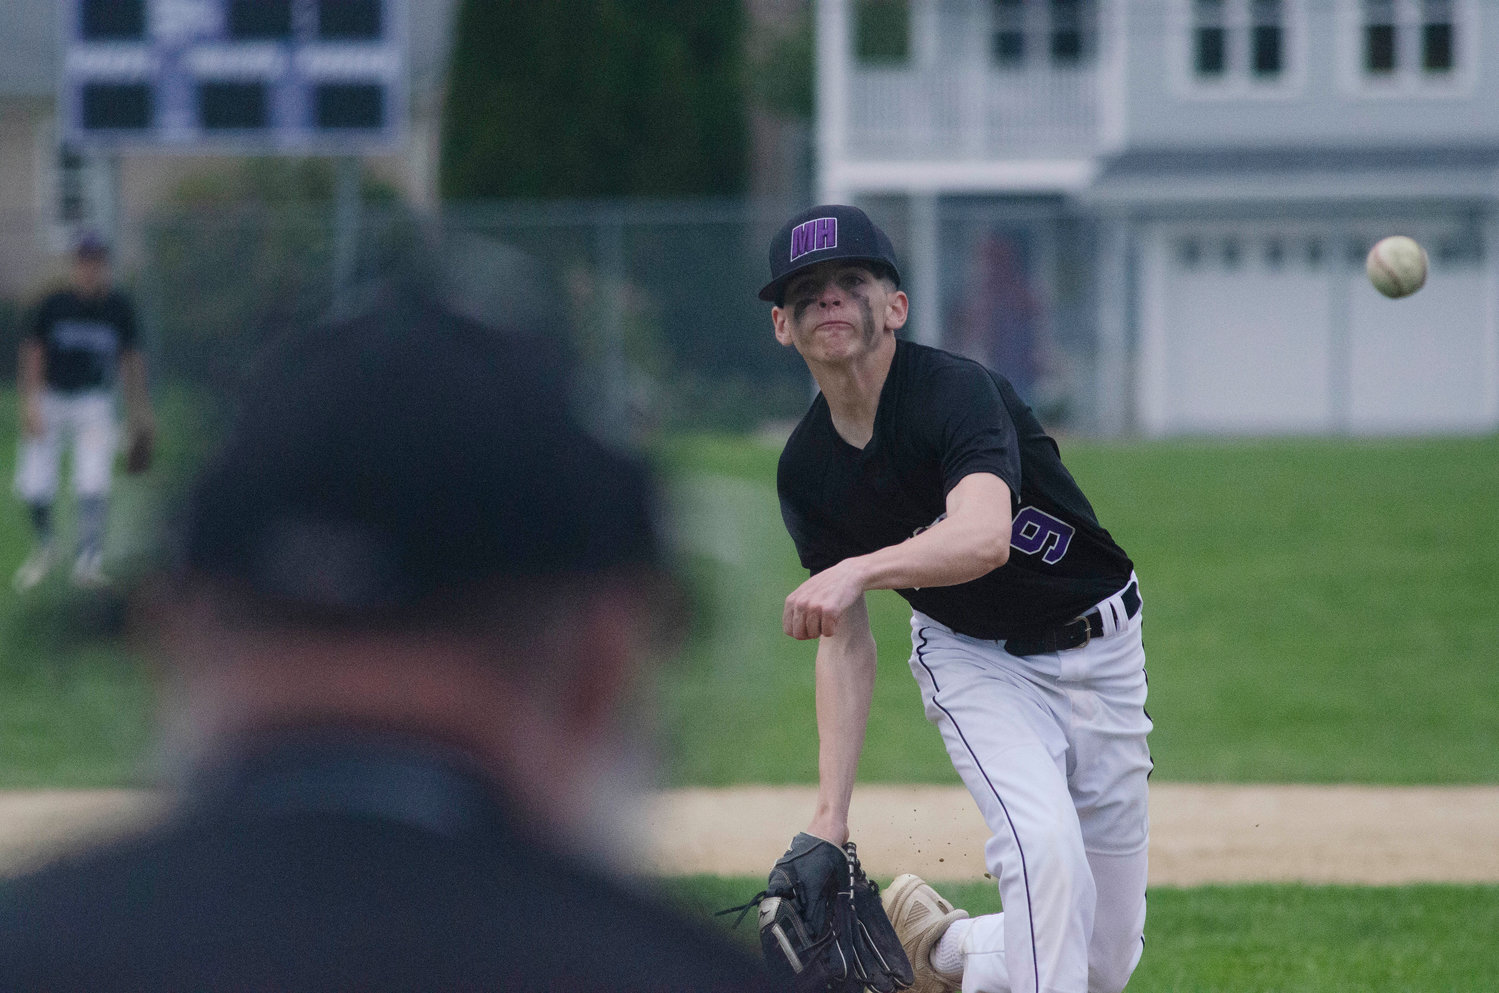 Freshman pitcher Ethan Santerre throws a side arm pitch during the game in the top of the seventh inning. Santerre struck out four and gave up five runs in two innings.